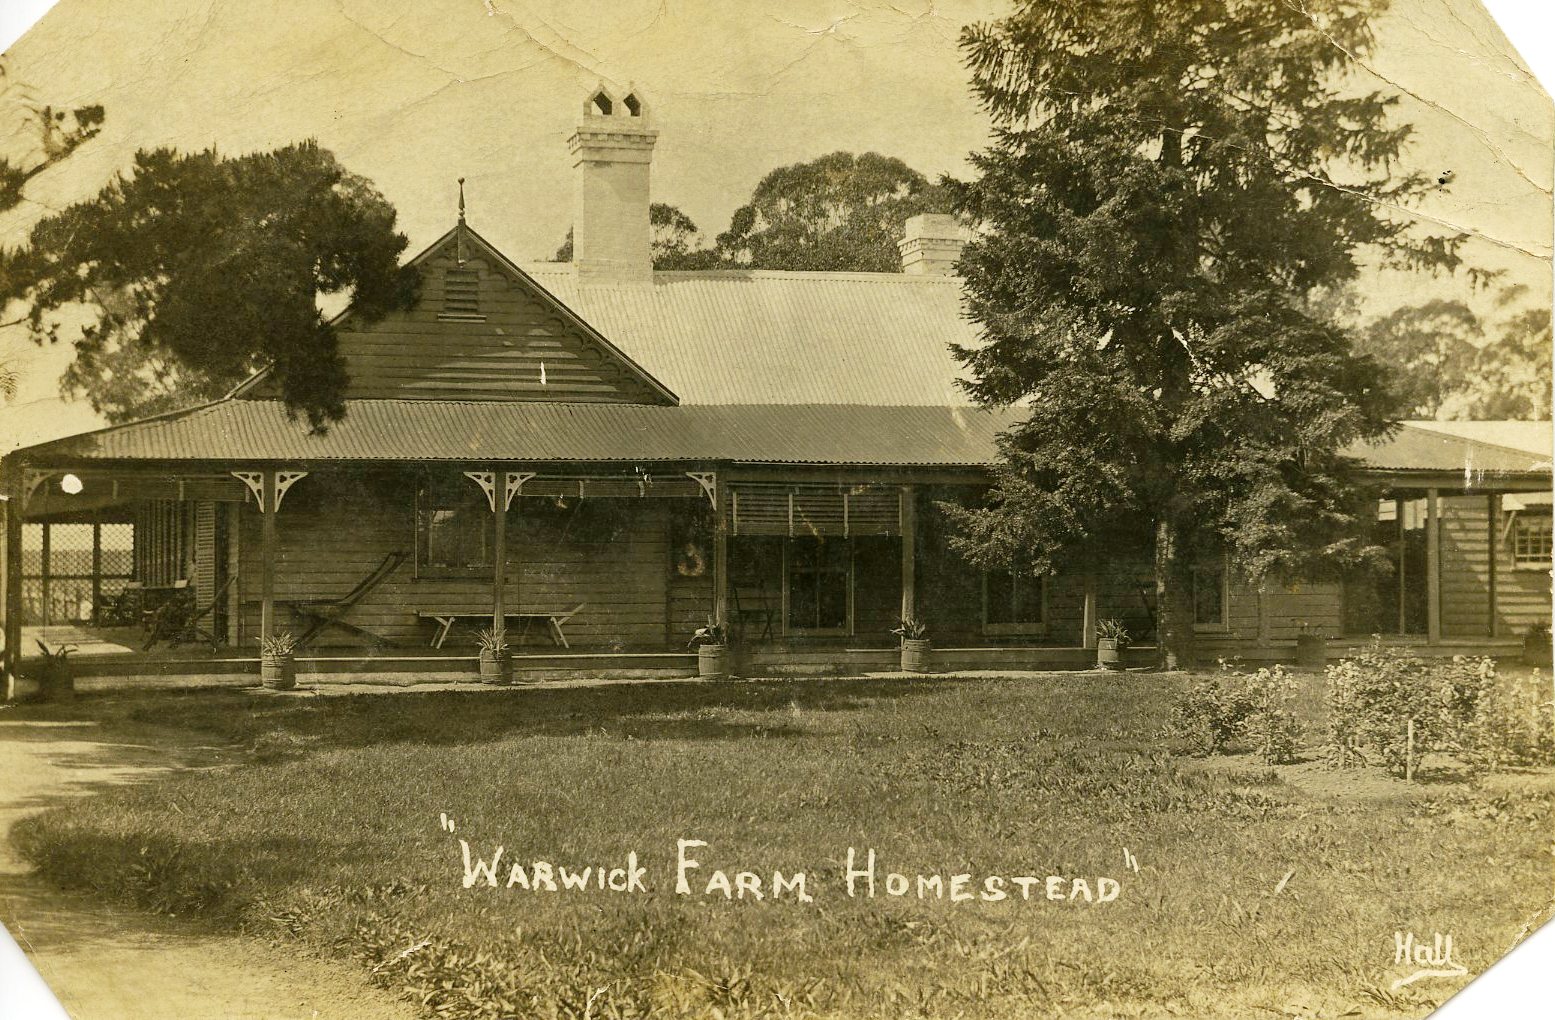 Warwick Farm Homestead was built in the 1880s and was located on the corner of Governor Macquarie Drive and Shore Street, Warwick Farm